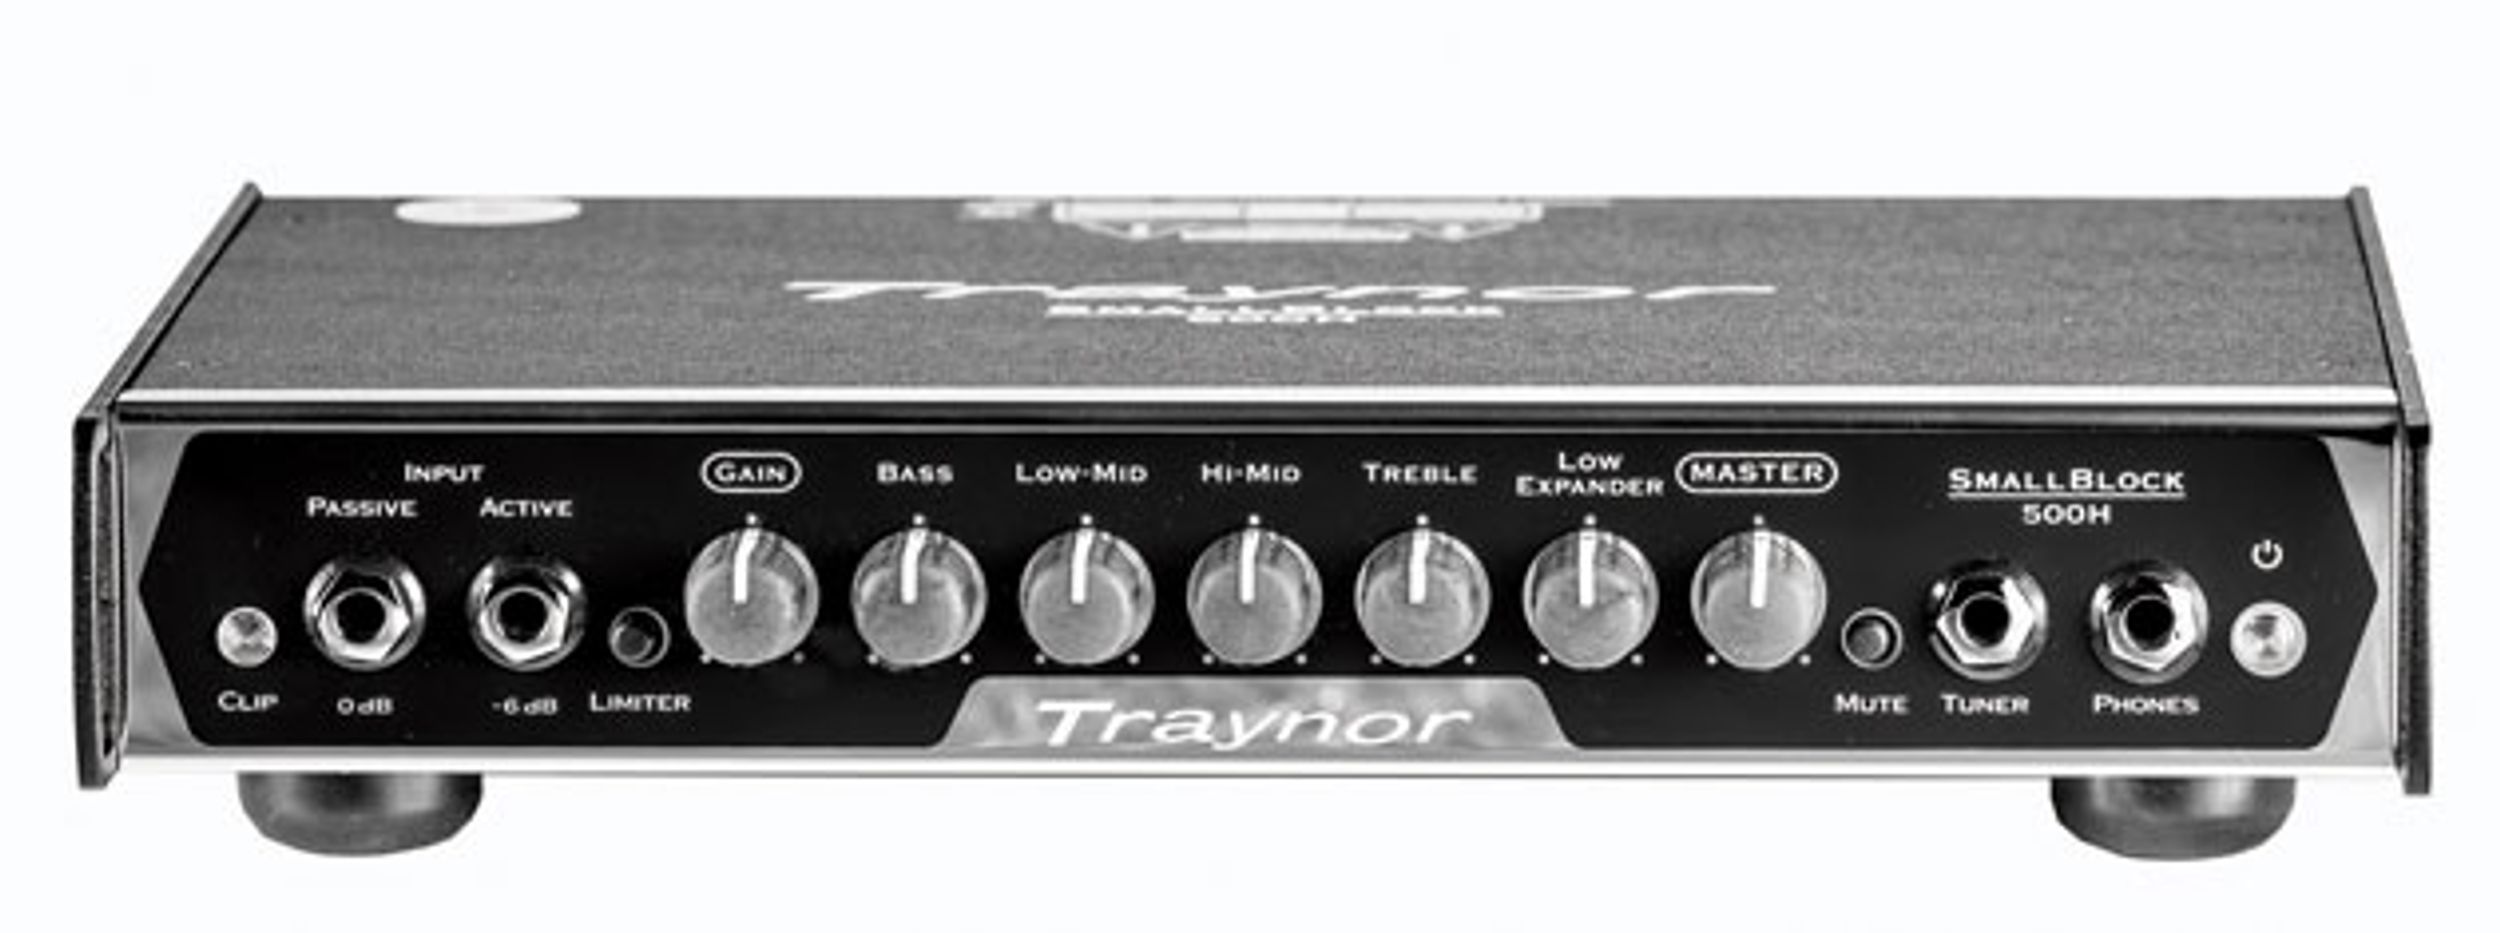 Traynor Introduces Small Block Amp Series